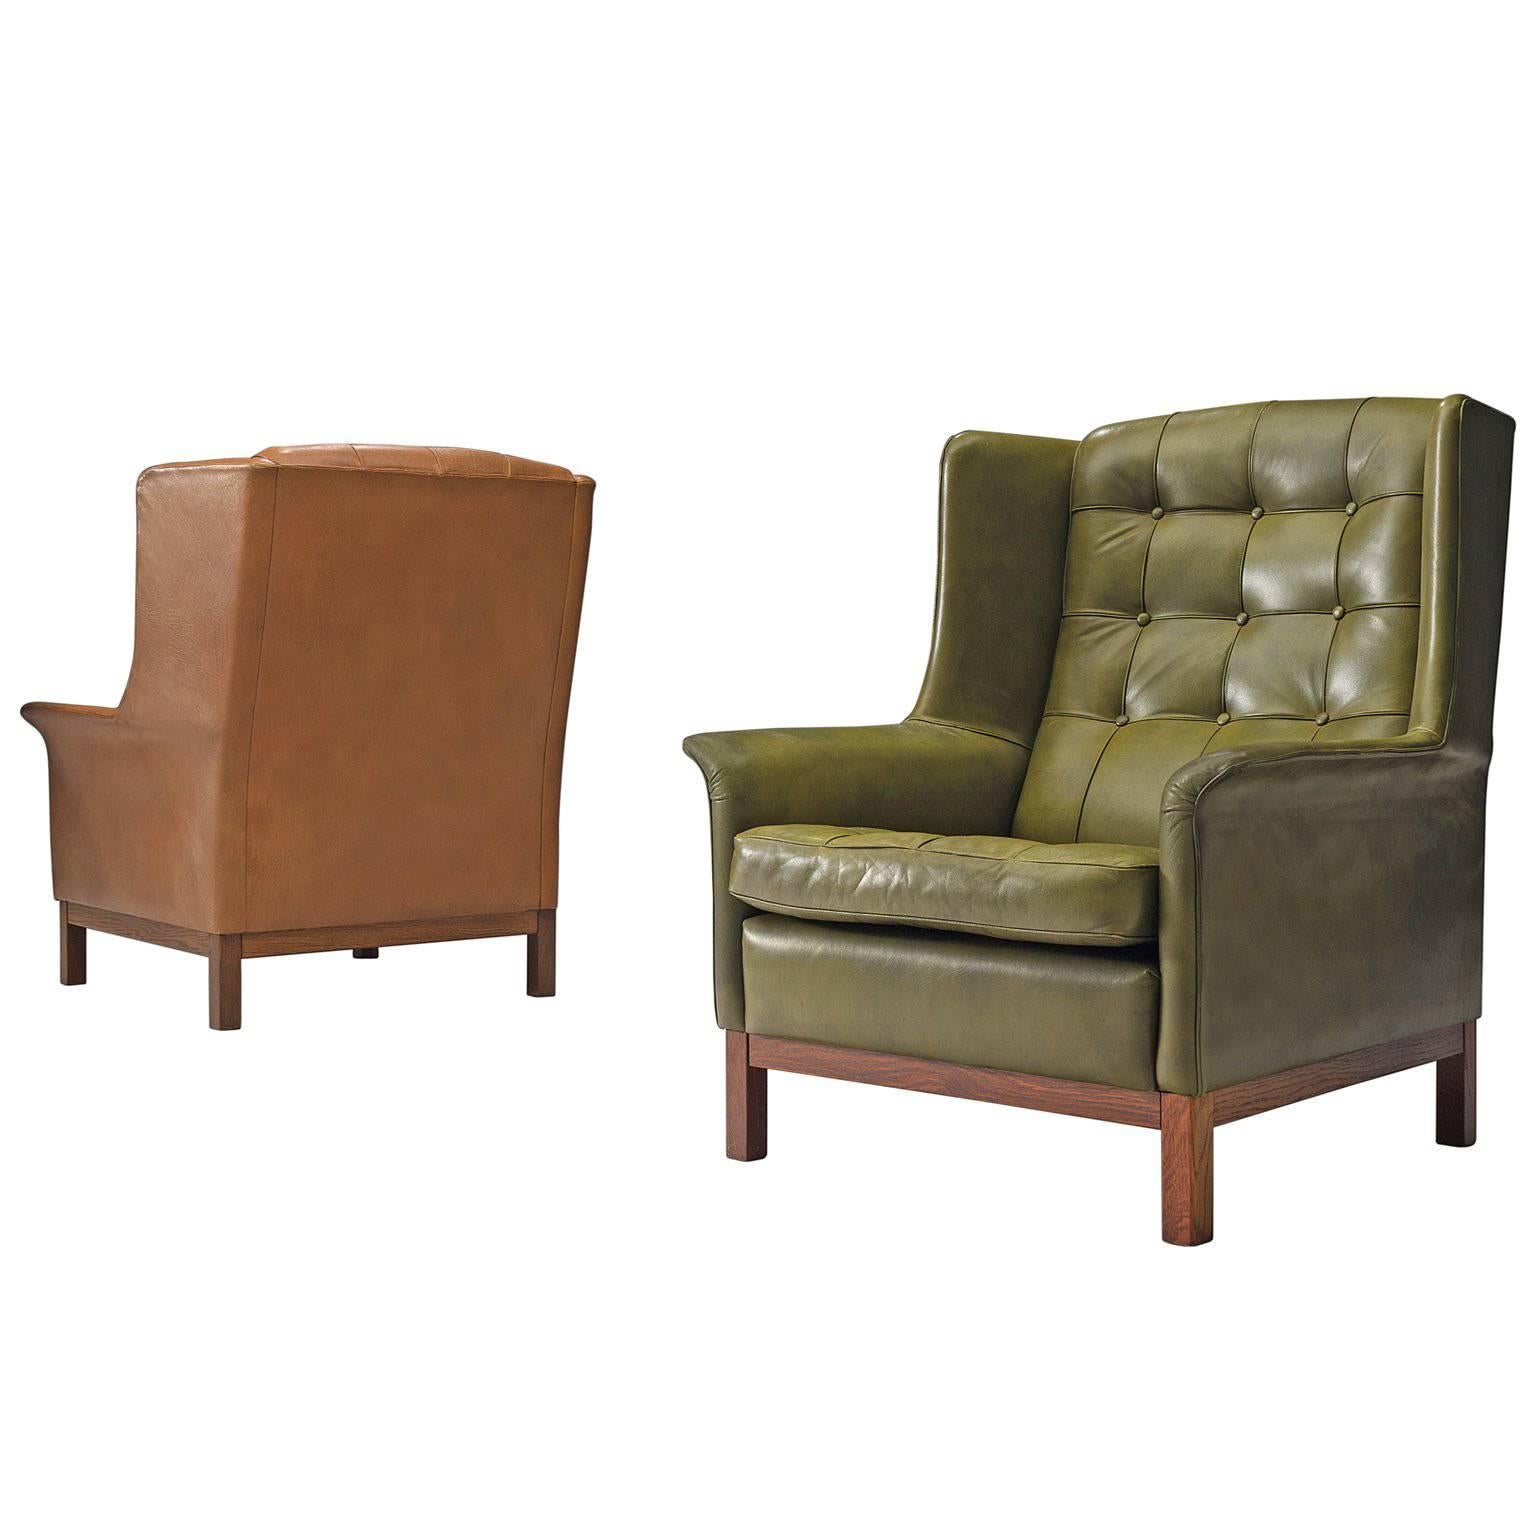 Arne Norell High Back Chairs in Patinated Green and Cognac Leather